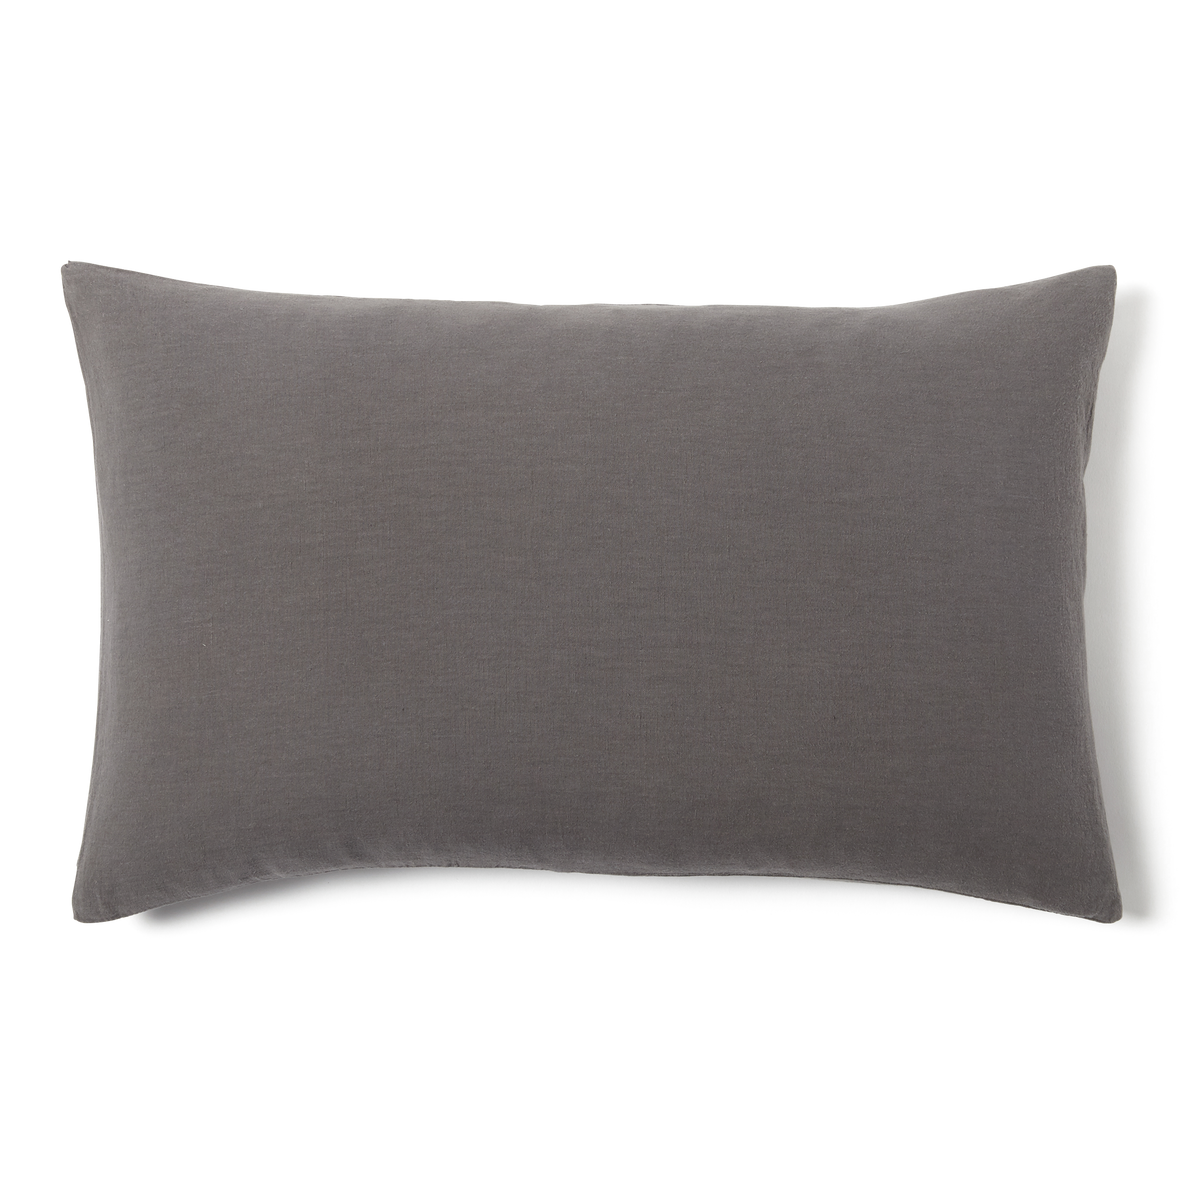 Made in Portugal from a blend of linen and cotton, this decorative pillow features a light, textured feel and a relaxed, laidback look.